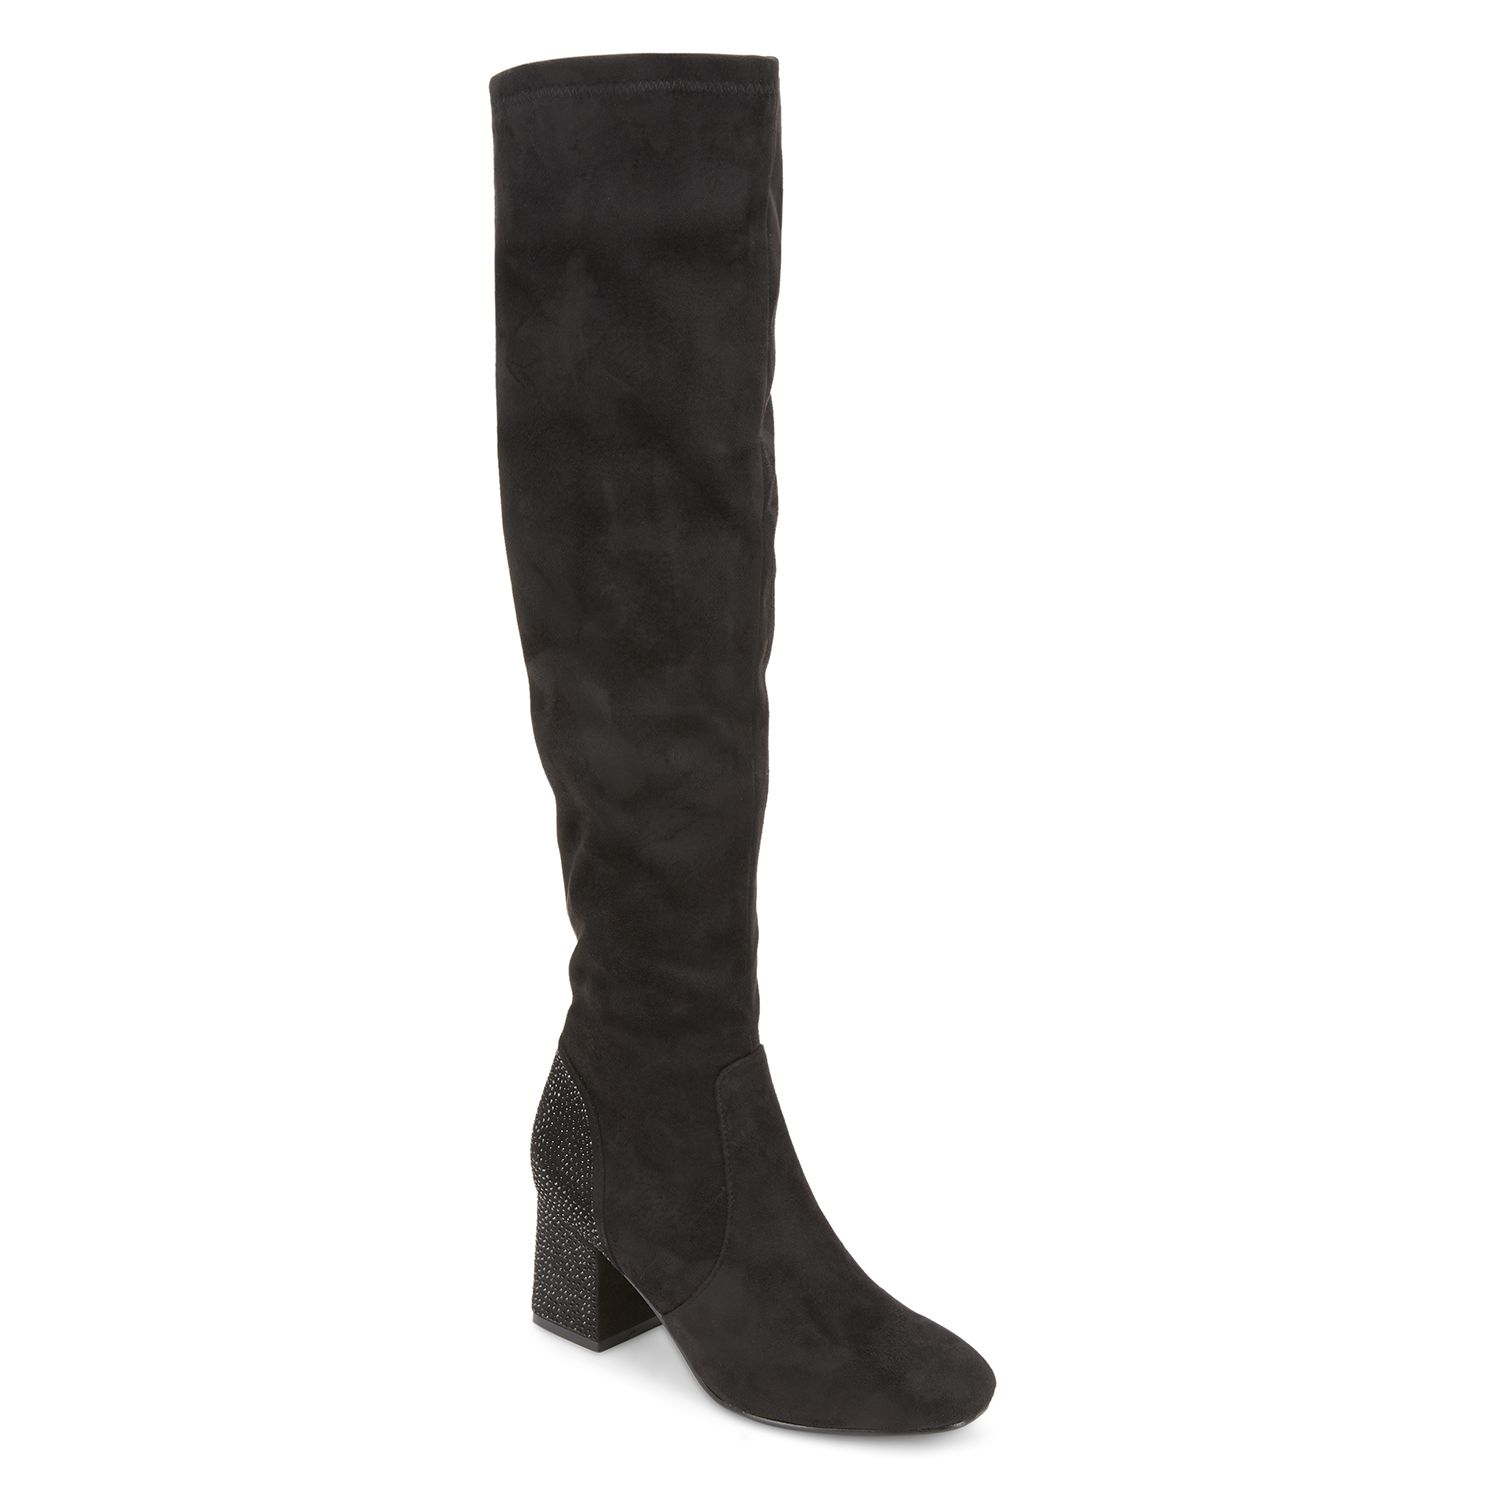 olivia miller over the knee boots